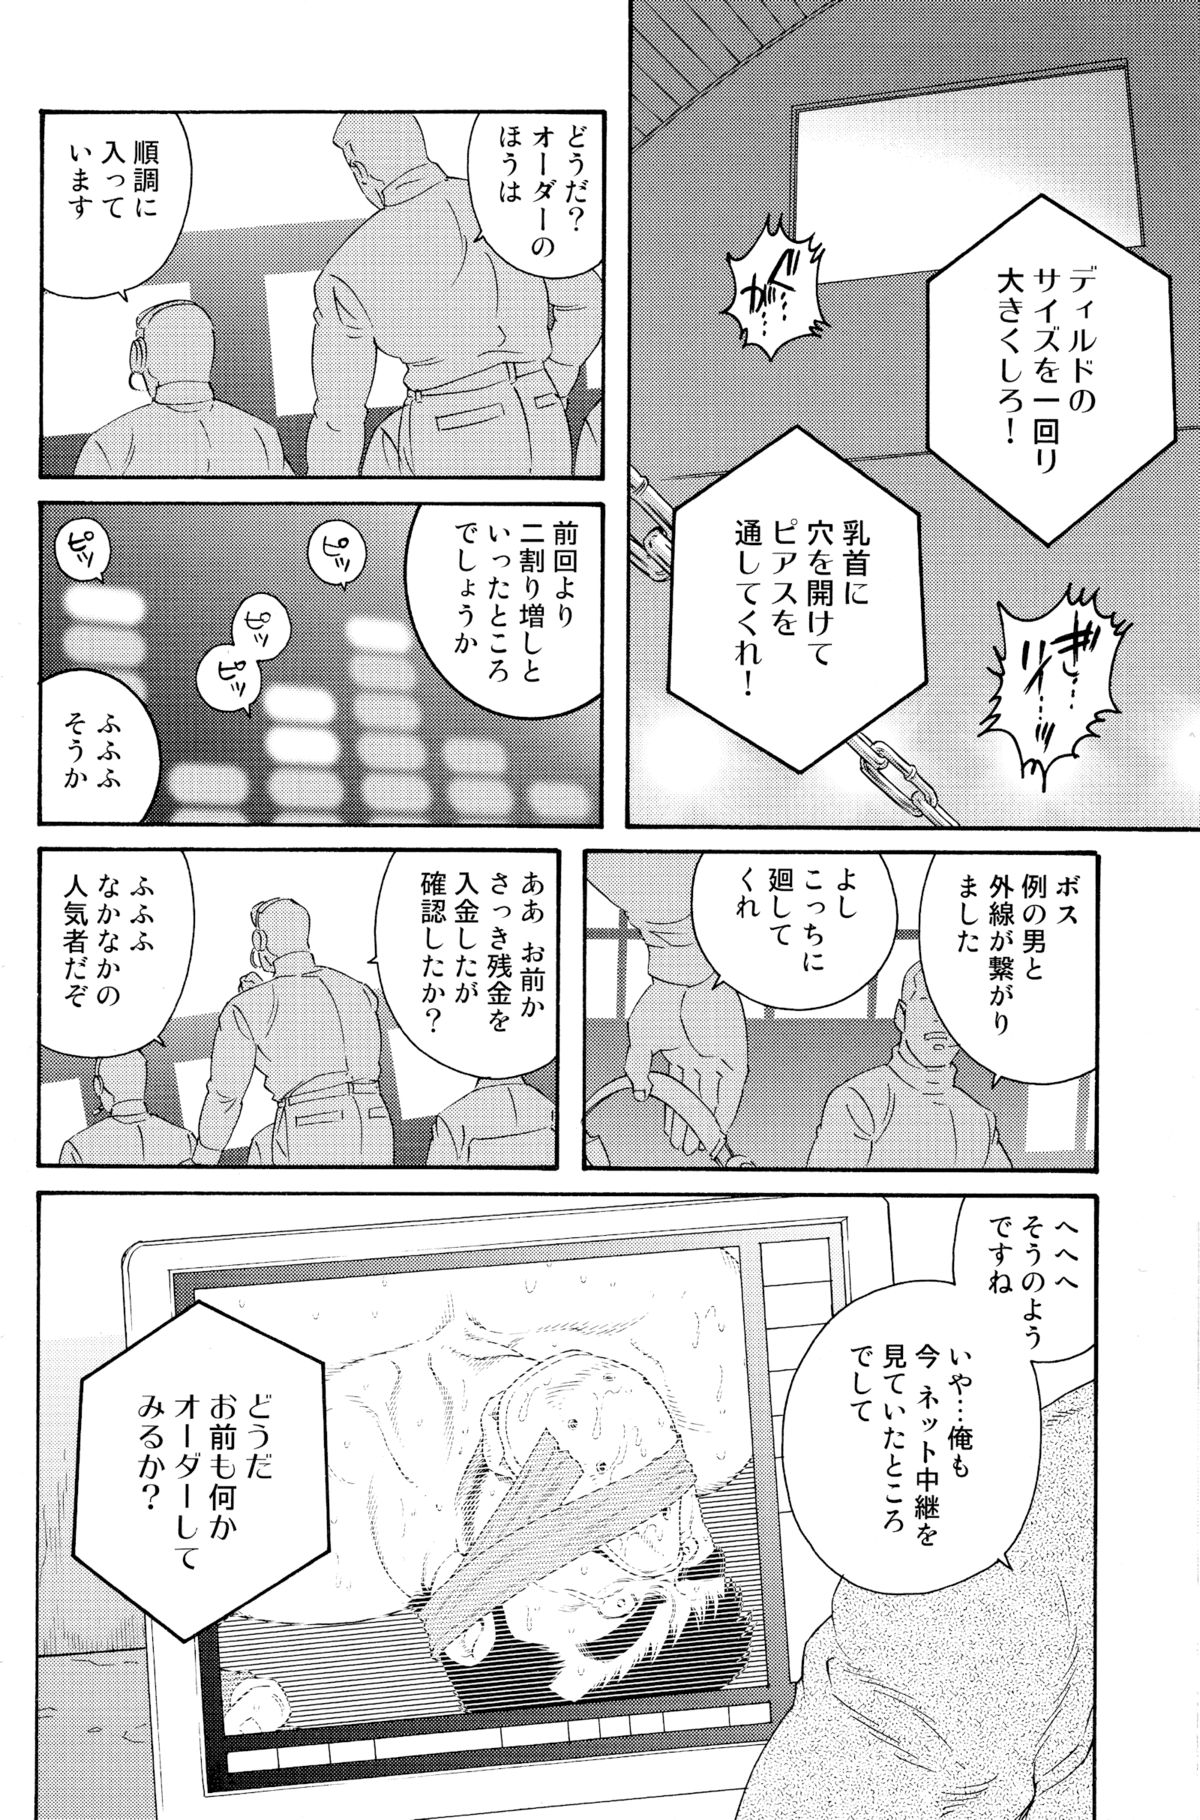 [Gengoroh Tagame] Standing Ovation page 14 full